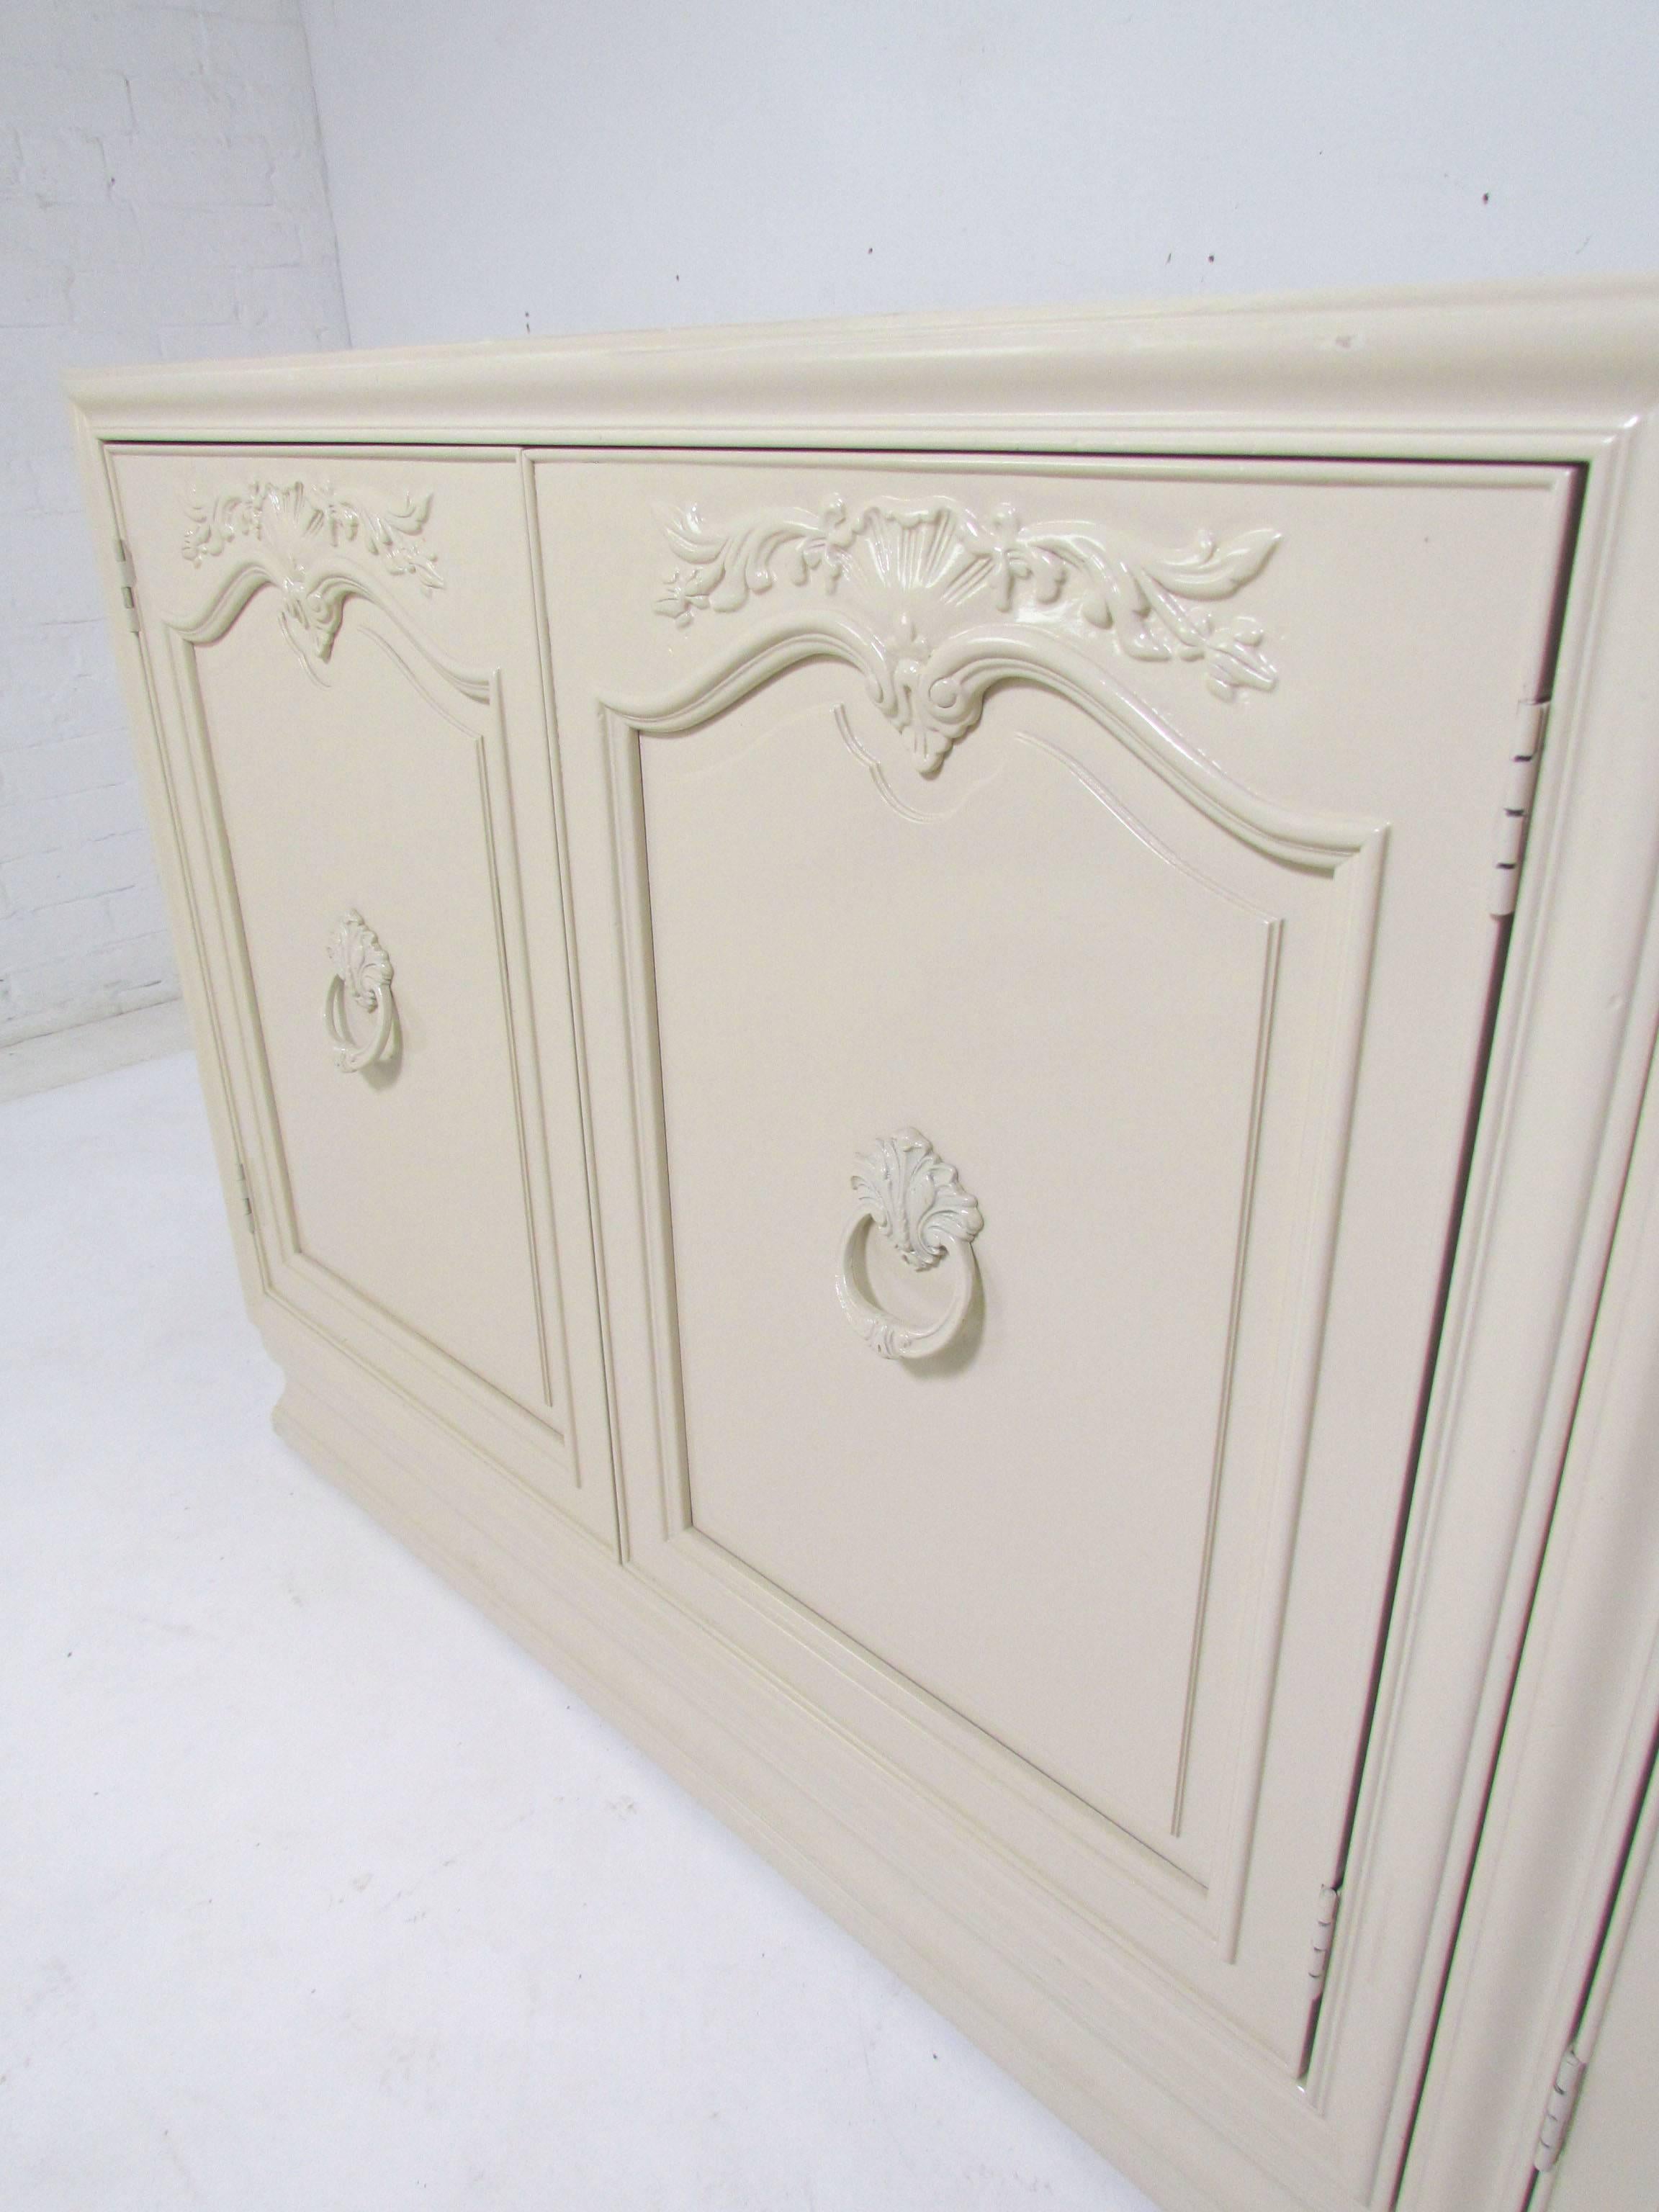 American Classical Revival Mid-Century White Lacquered Sideboard Credenza by Henredon